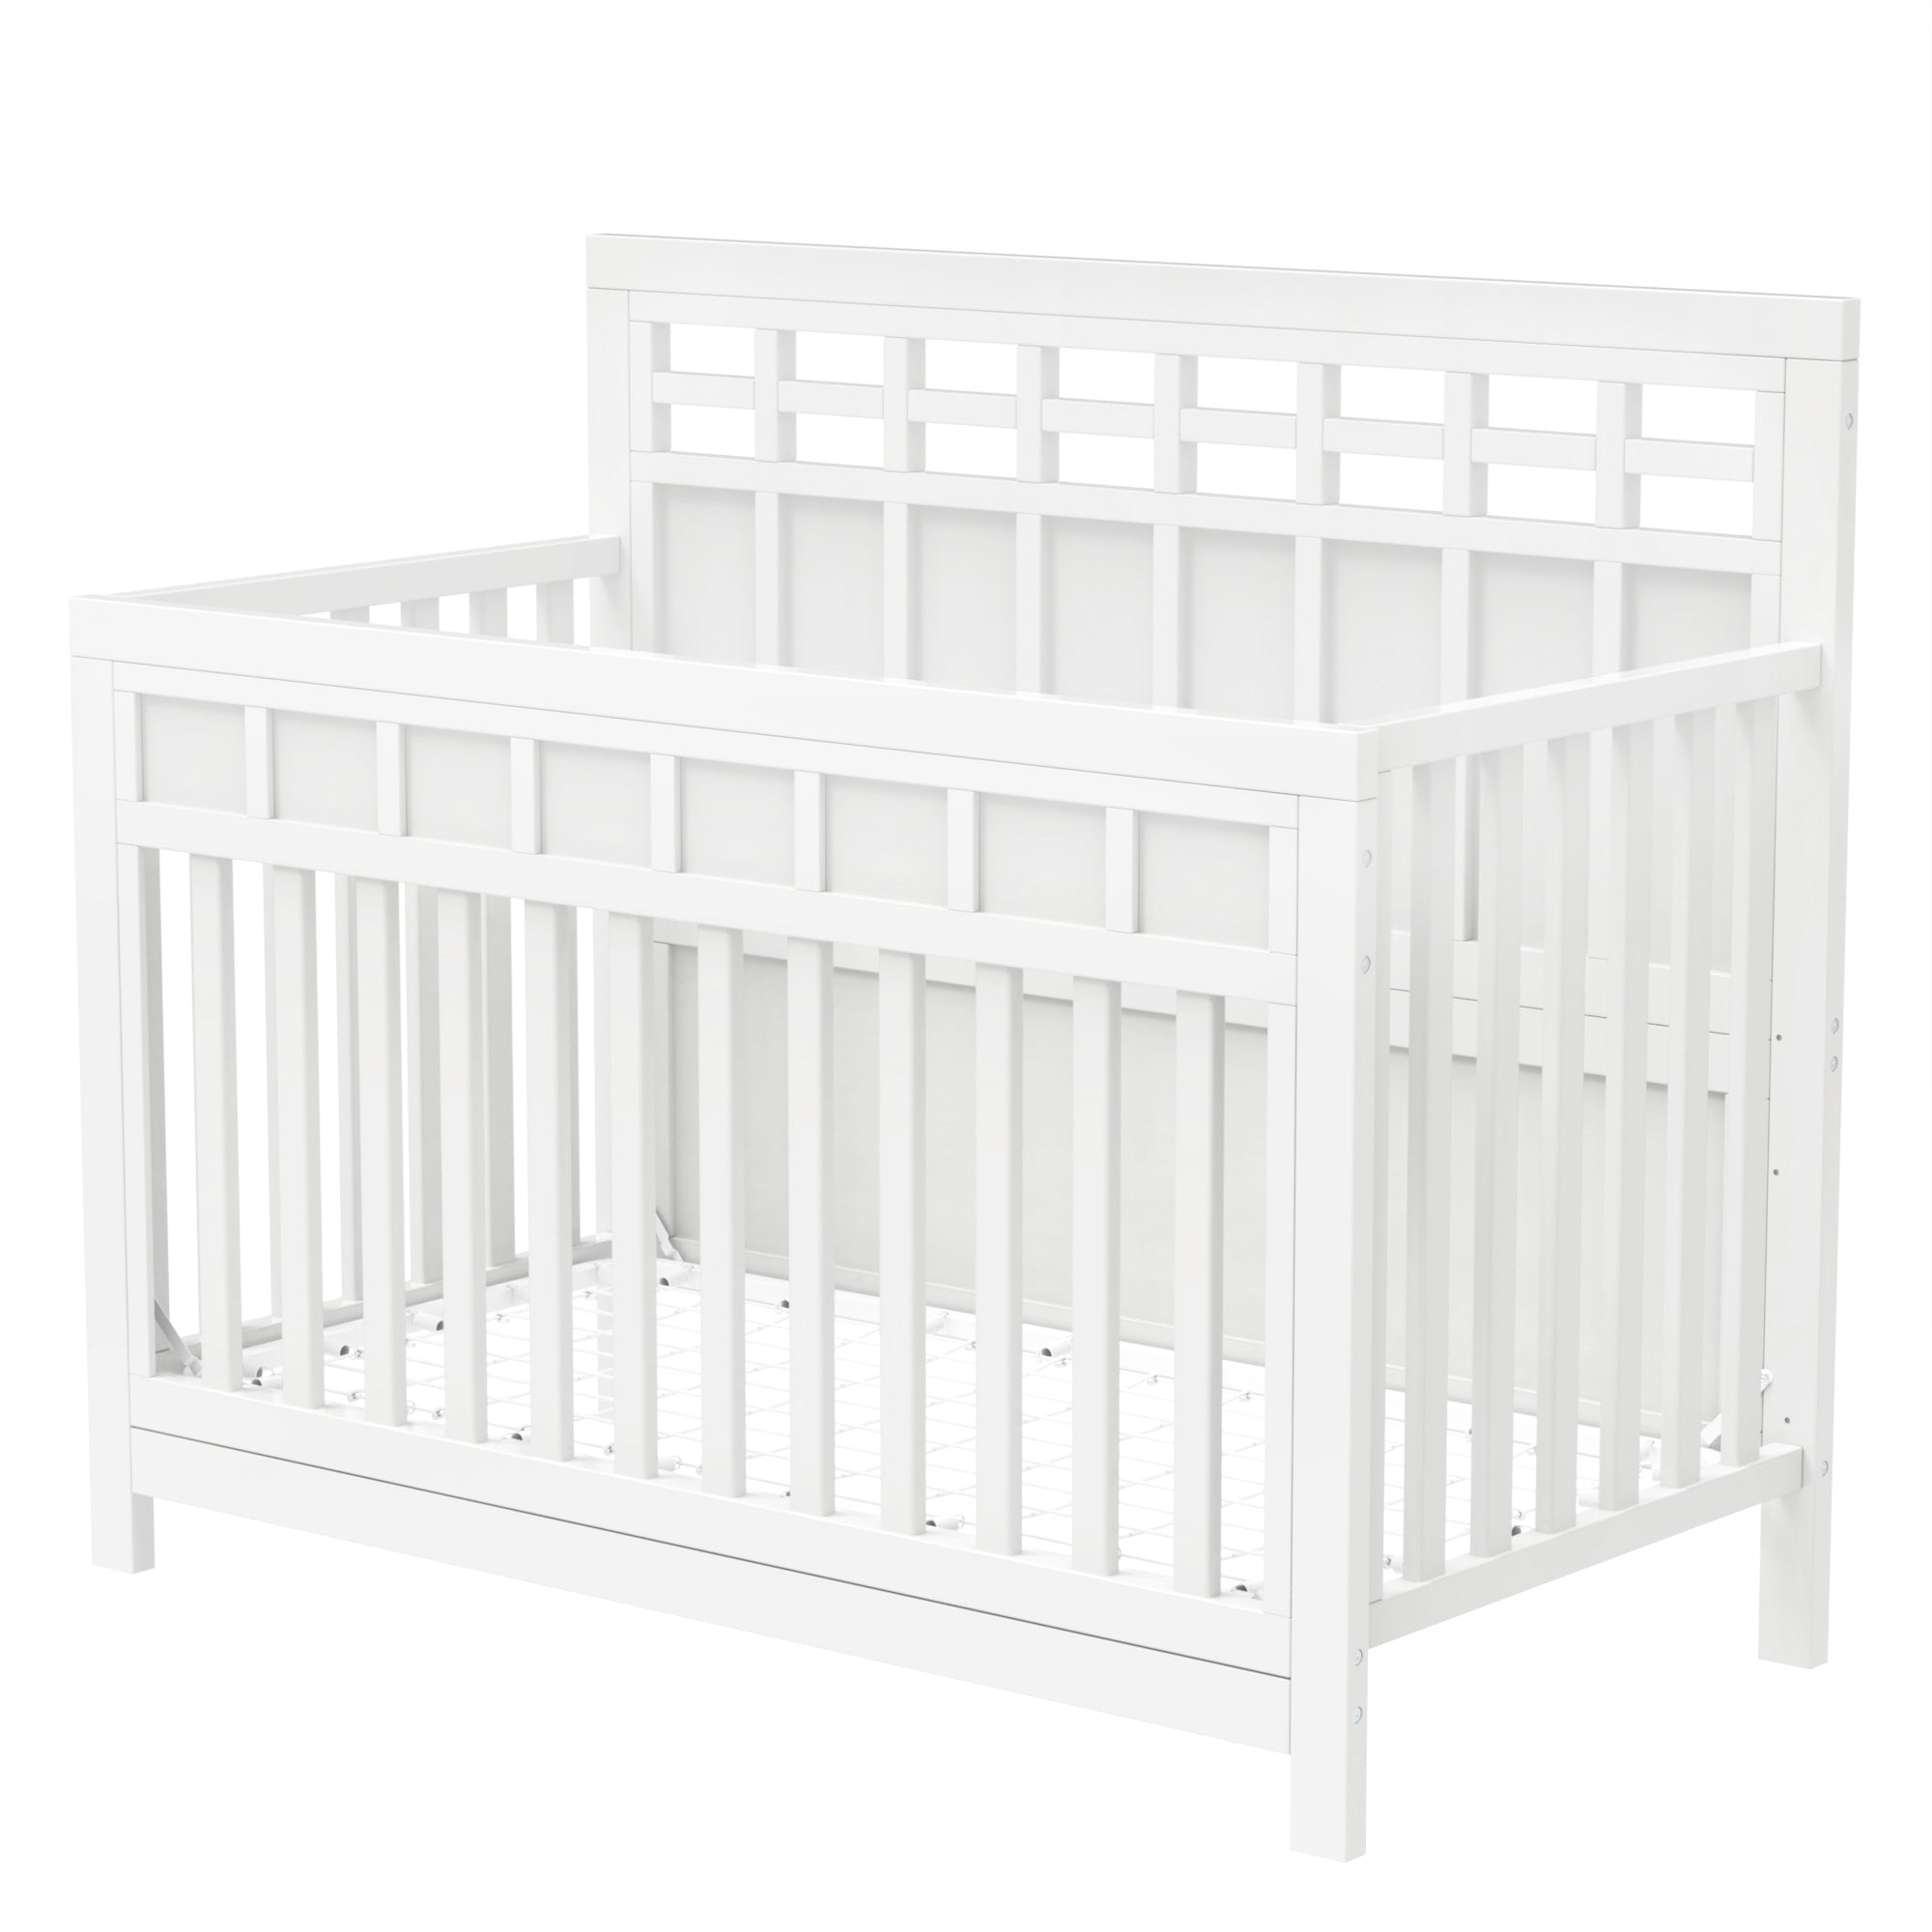 Certified Baby Safe Crib, Pine Solid Wood, Non-Toxic Finish